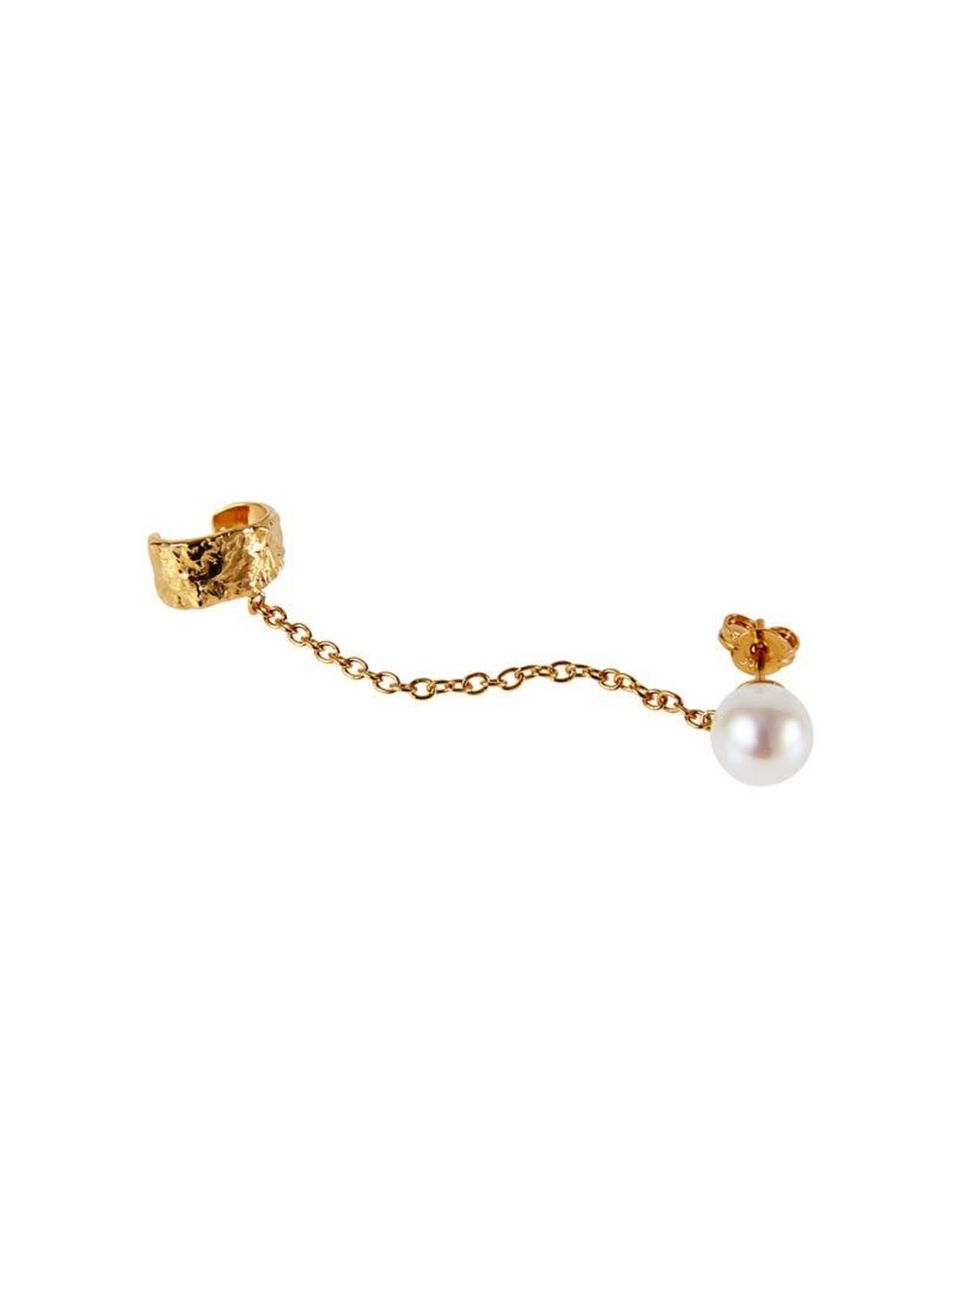 <p>An unexpected take on an elegant pearl earring.</p>

<p> </p>

<p><a href="http://lucyfolk.com/shop/appeteaser-pearl-cuff-earring/" target="_blank">Lucy Folk</a> earring, £125</p>